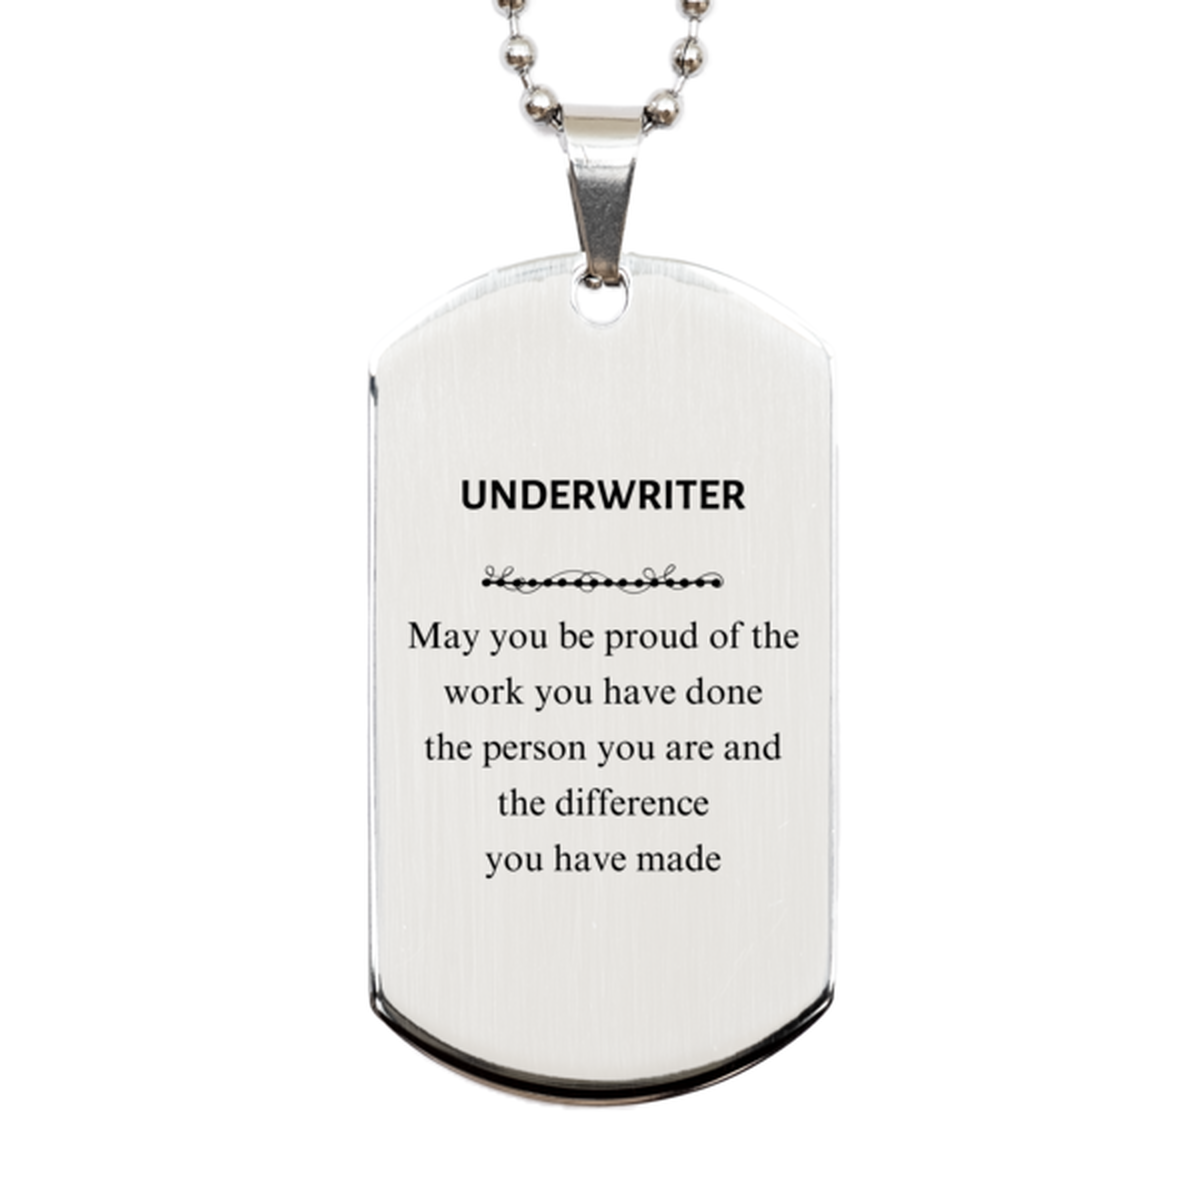 Underwriter May you be proud of the work you have done, Retirement Underwriter Silver Dog Tag for Colleague Appreciation Gifts Amazing for Underwriter